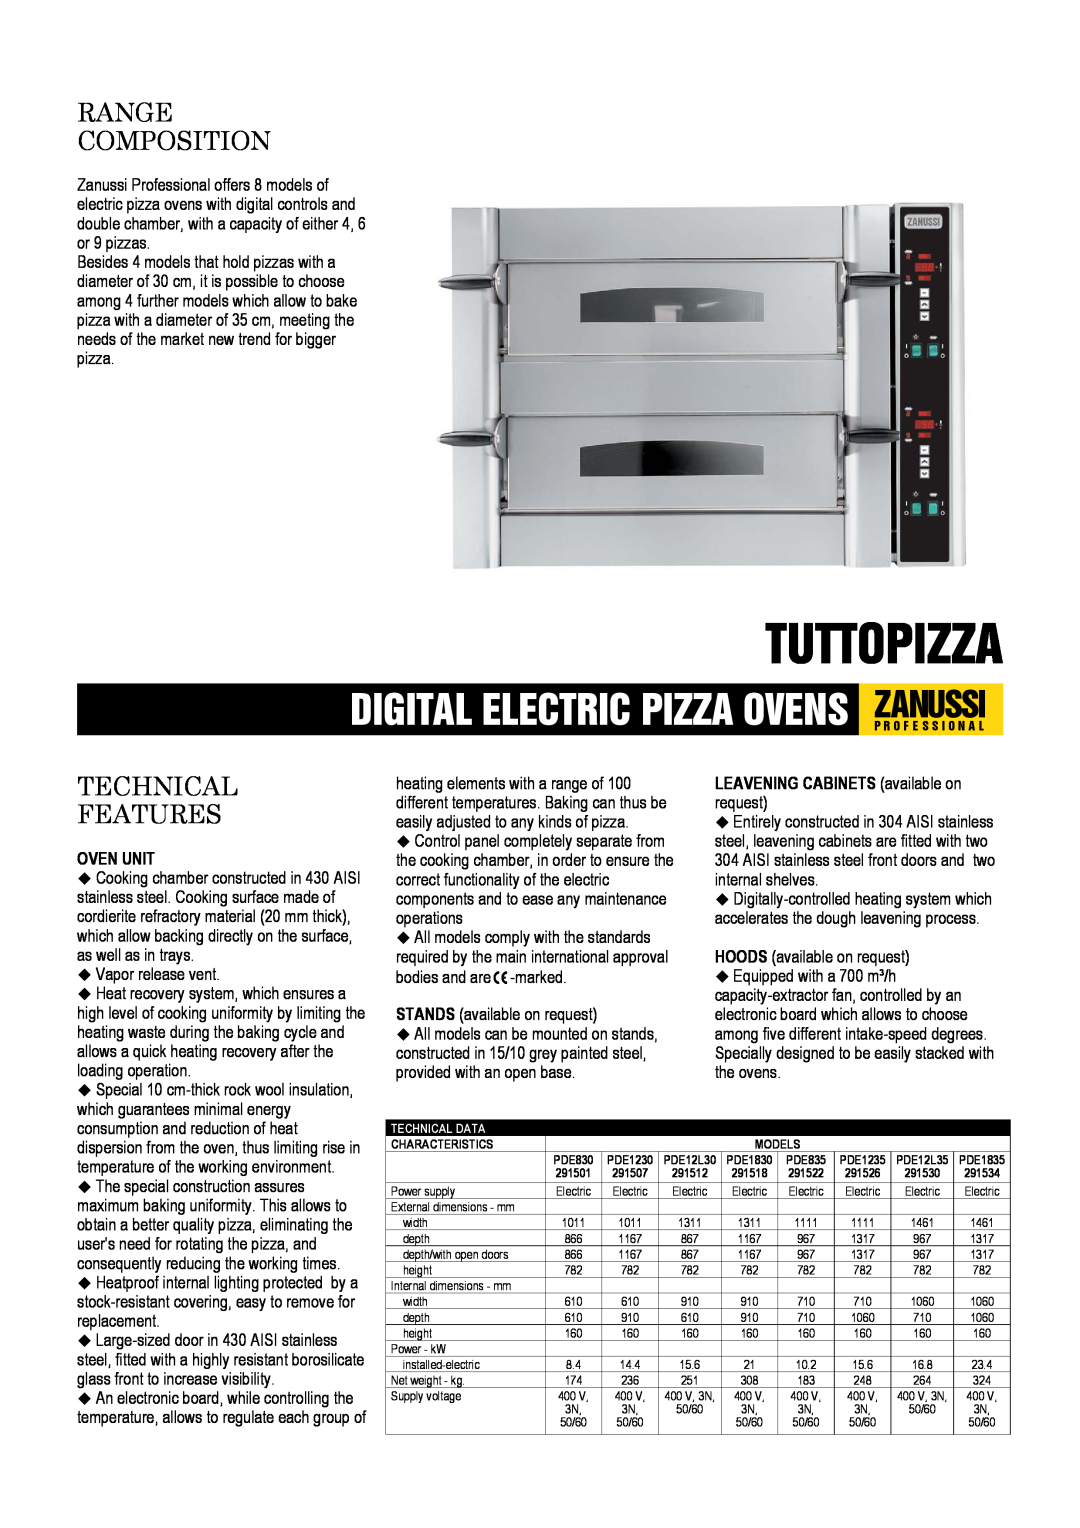 Zanussi 291512 dimensions Tuttopizza, Range Composition, Technical Features, Oven Unit, LEAVENING CABINETS available on 